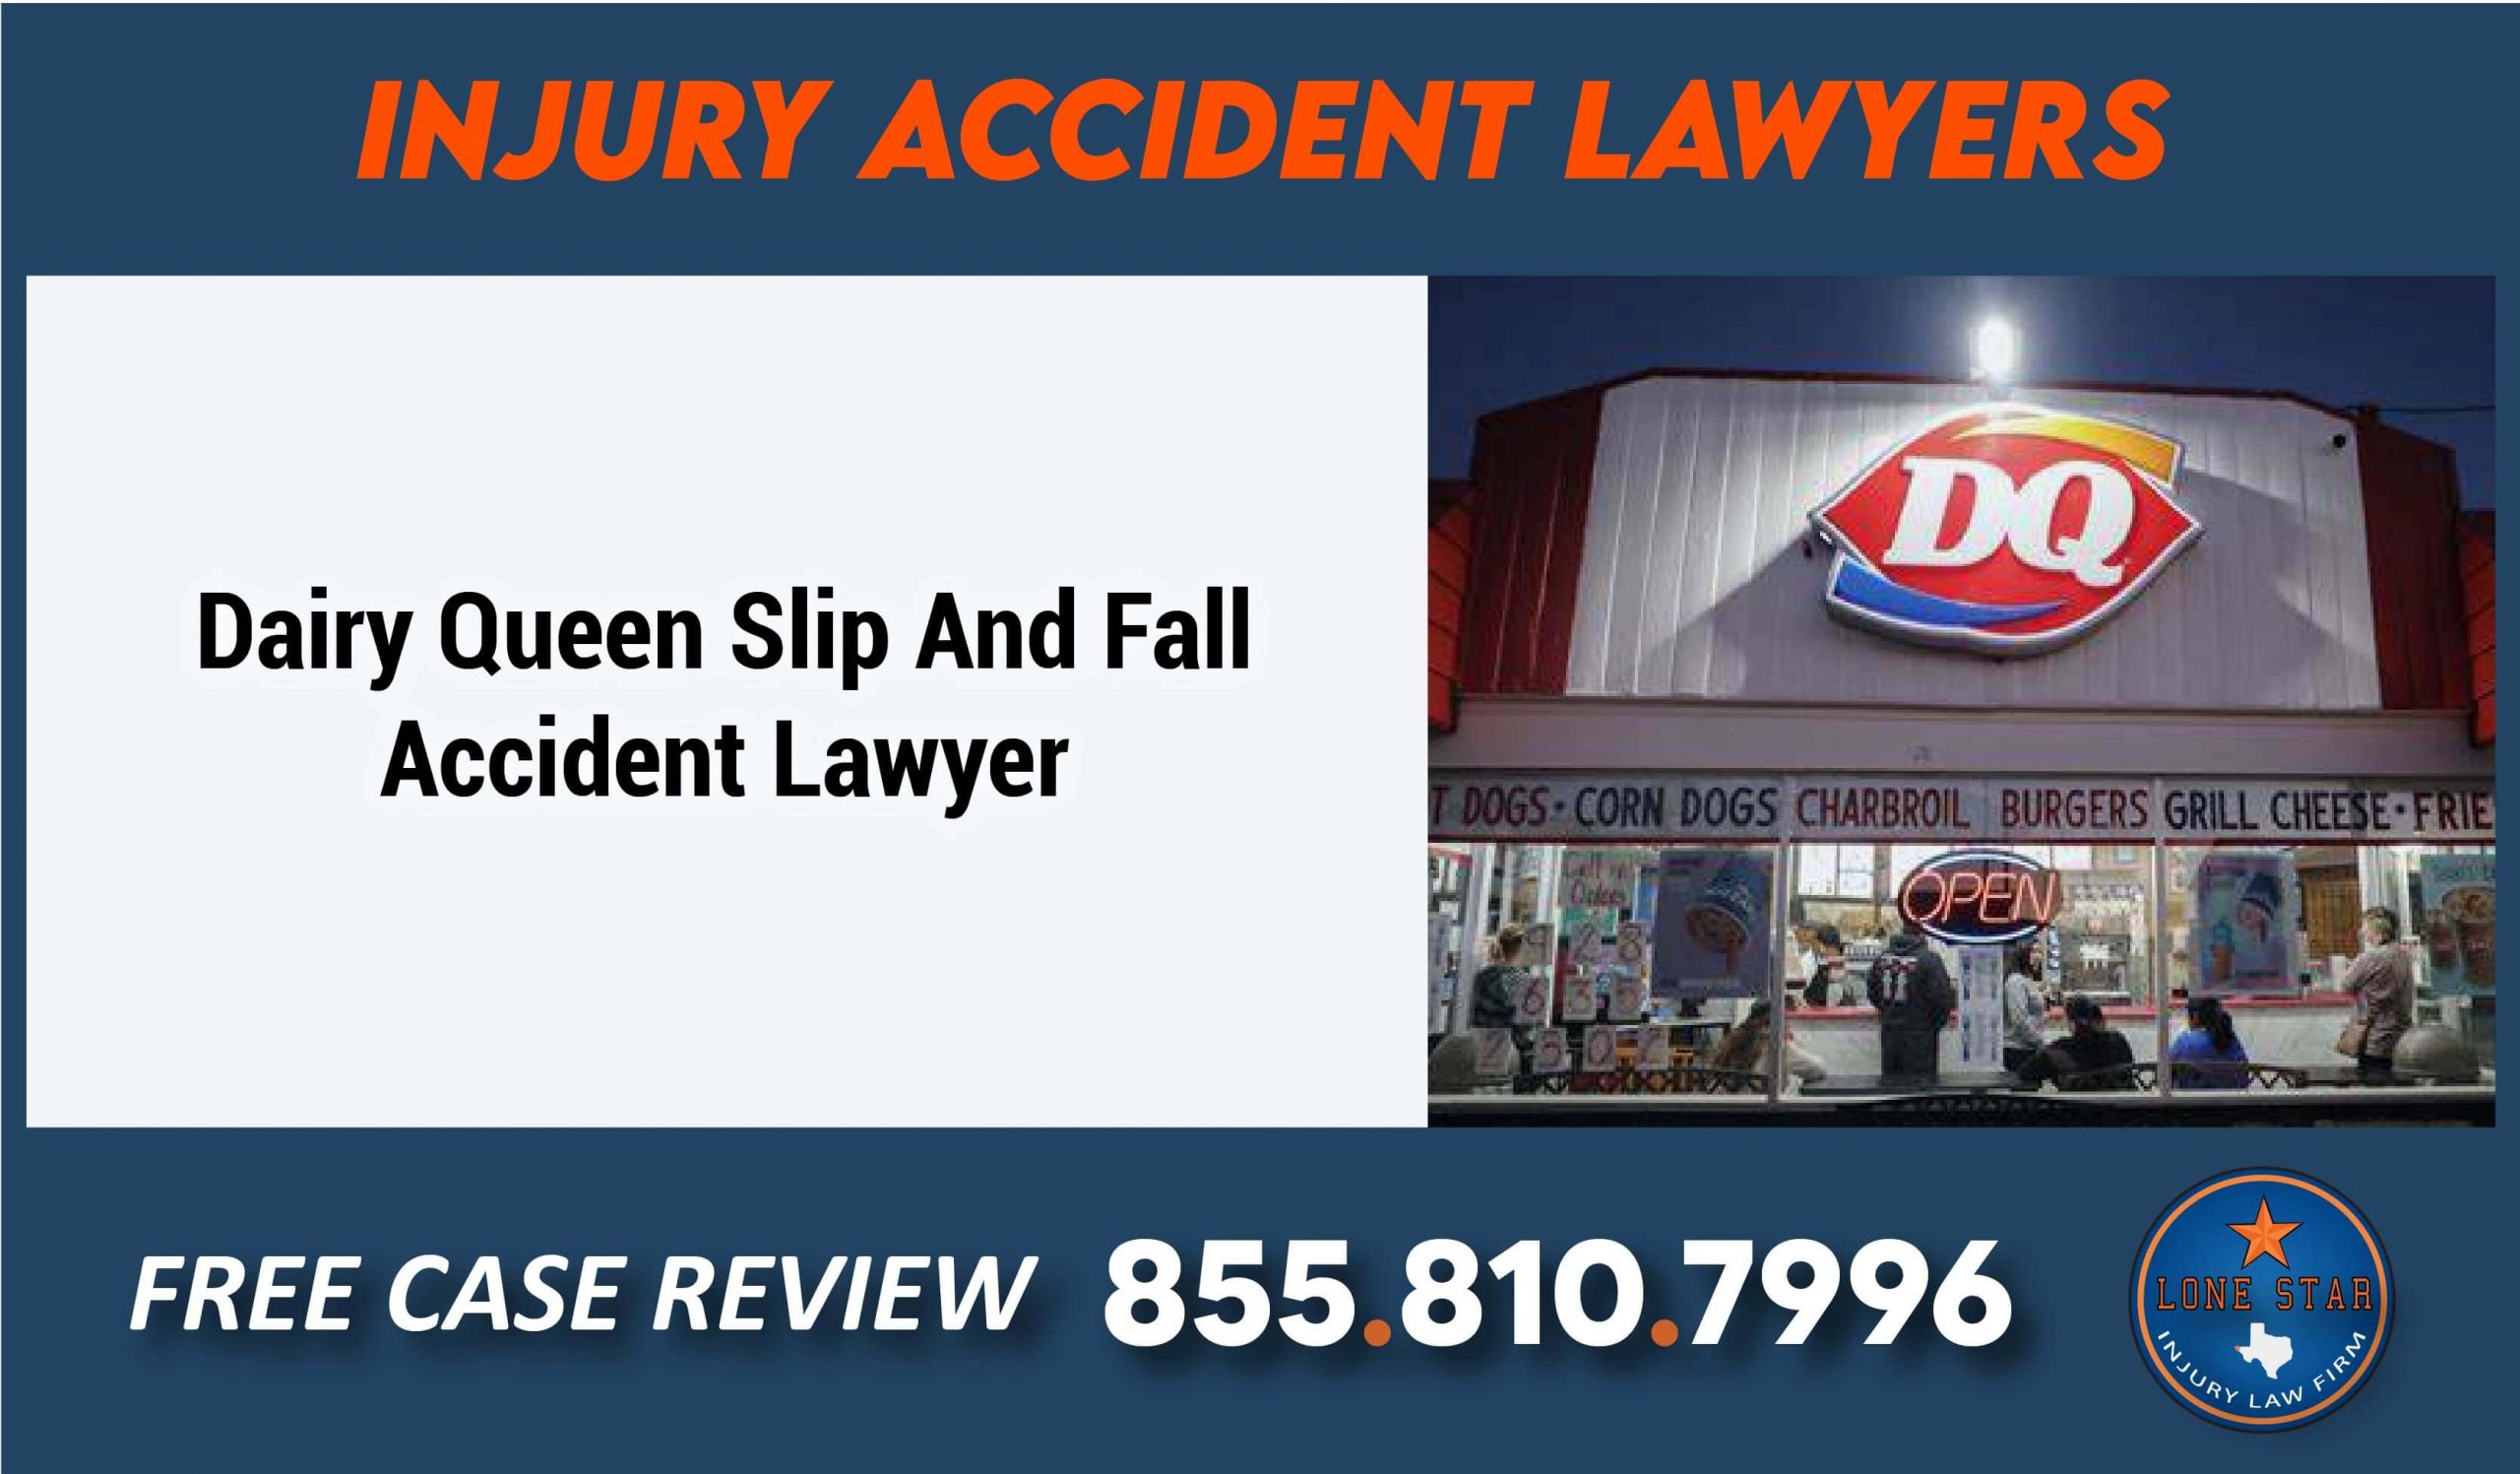 Dairy Queen Slip And Fall Accident Lawyerlawsuit sue compensation lawyer attorney liability incident